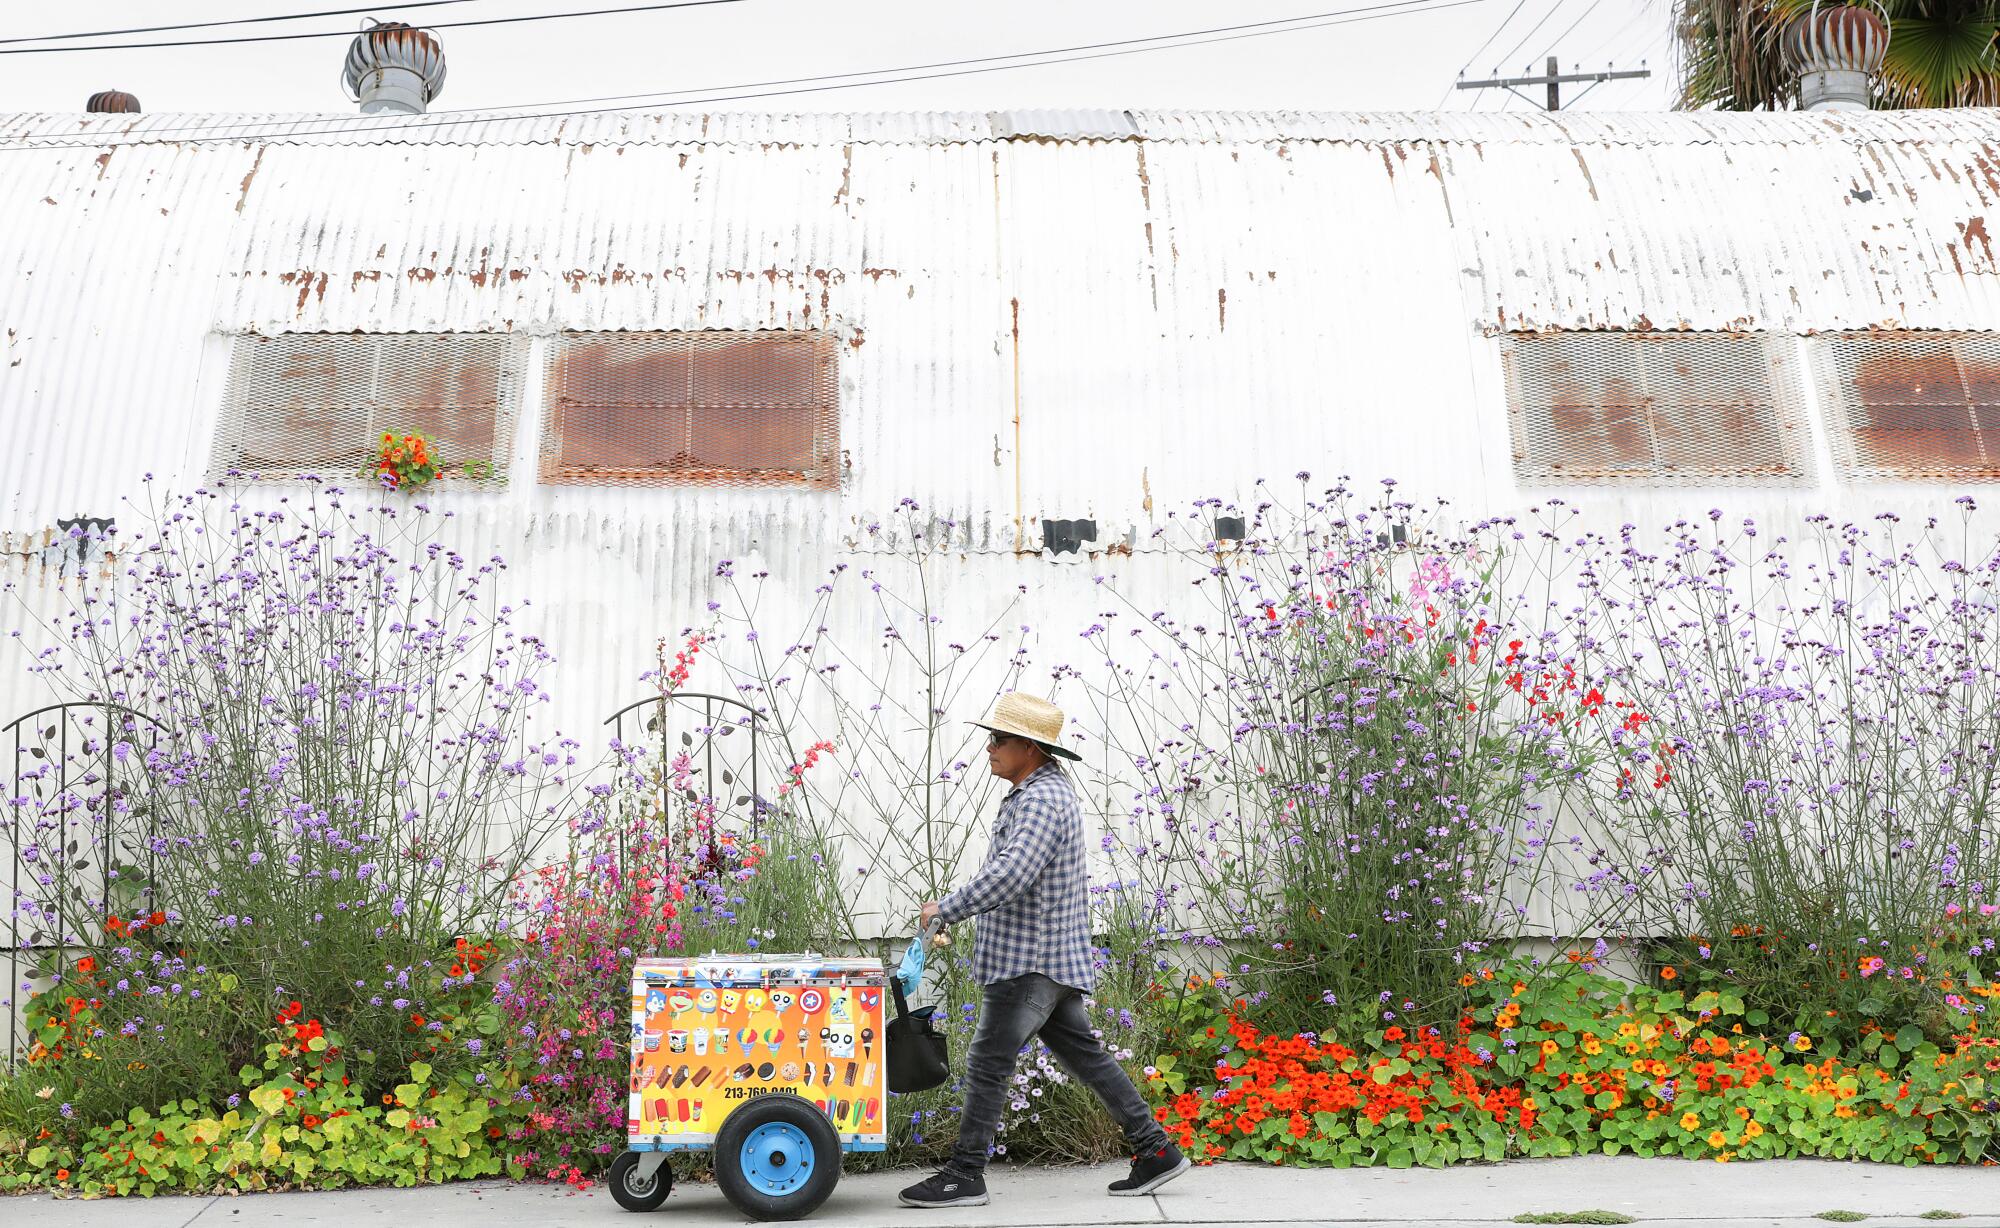 A person pushing a food cart walks past the Plant Chica's flowering plants along the sidewalk.